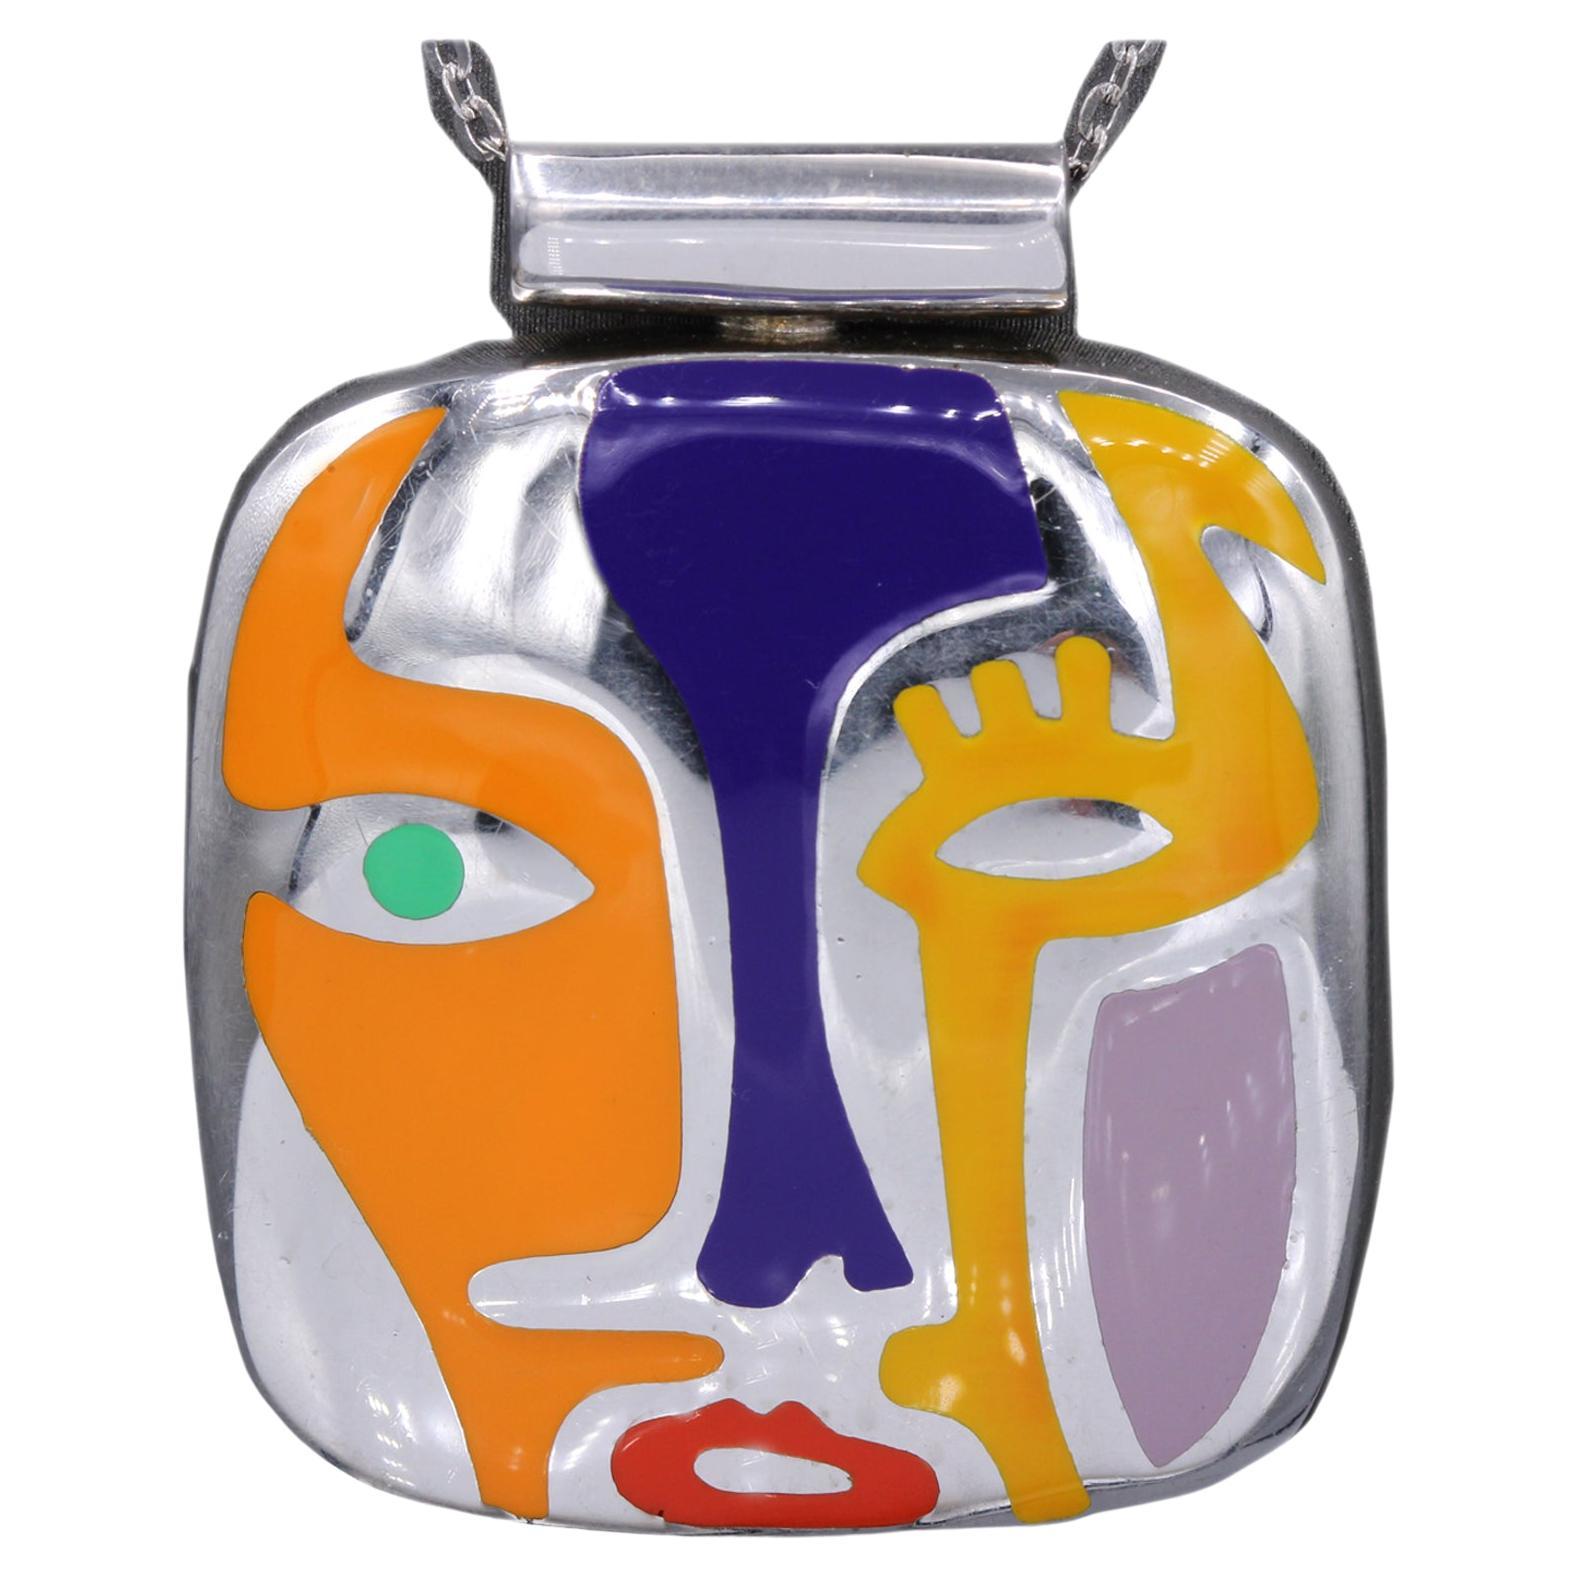 Unique  & beautiful Art Jewelry
Quality made Enamel Art Replica Pendant 
Inspired from famous artist.
Sterling Silver 925 - Hand Made in Italy
Approx. size 40 x 40 mm ( 1.5' x 1.5' Inch)
Slight Imperfections due to Manufacturing process
Highly